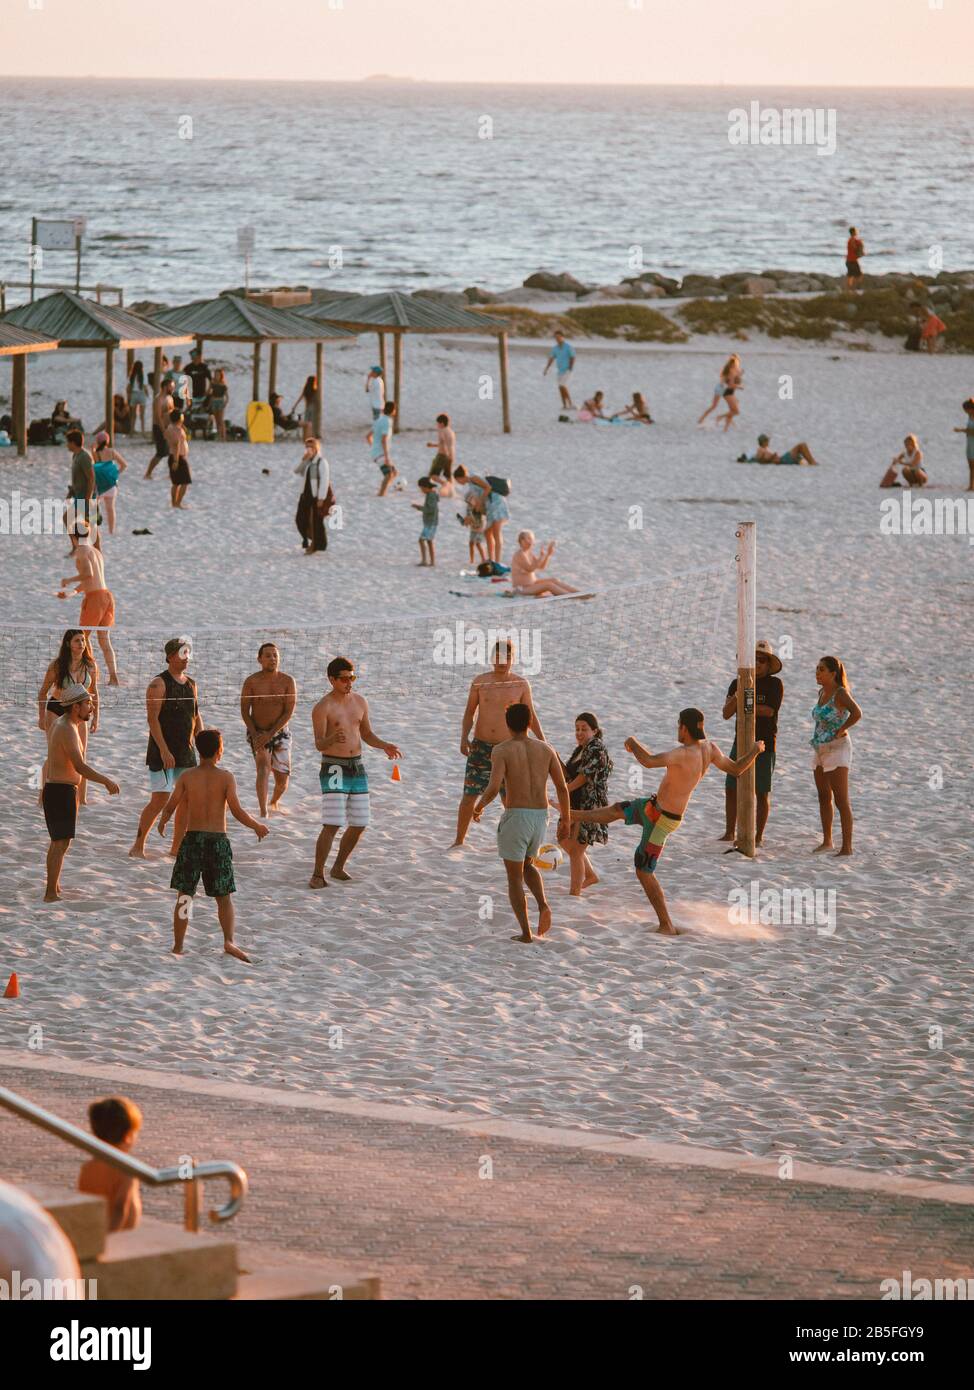 A group of tourists playing beach volleyball in Australia Stock Photo